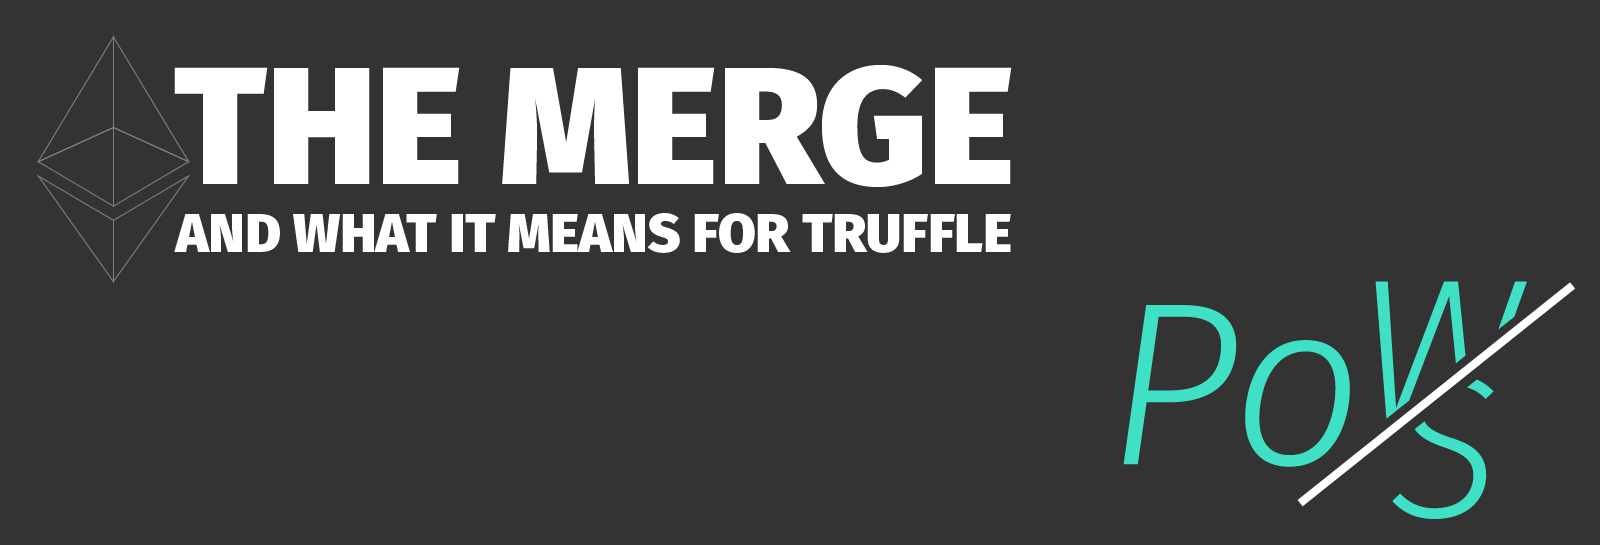 The Merge and what it means for Truffle